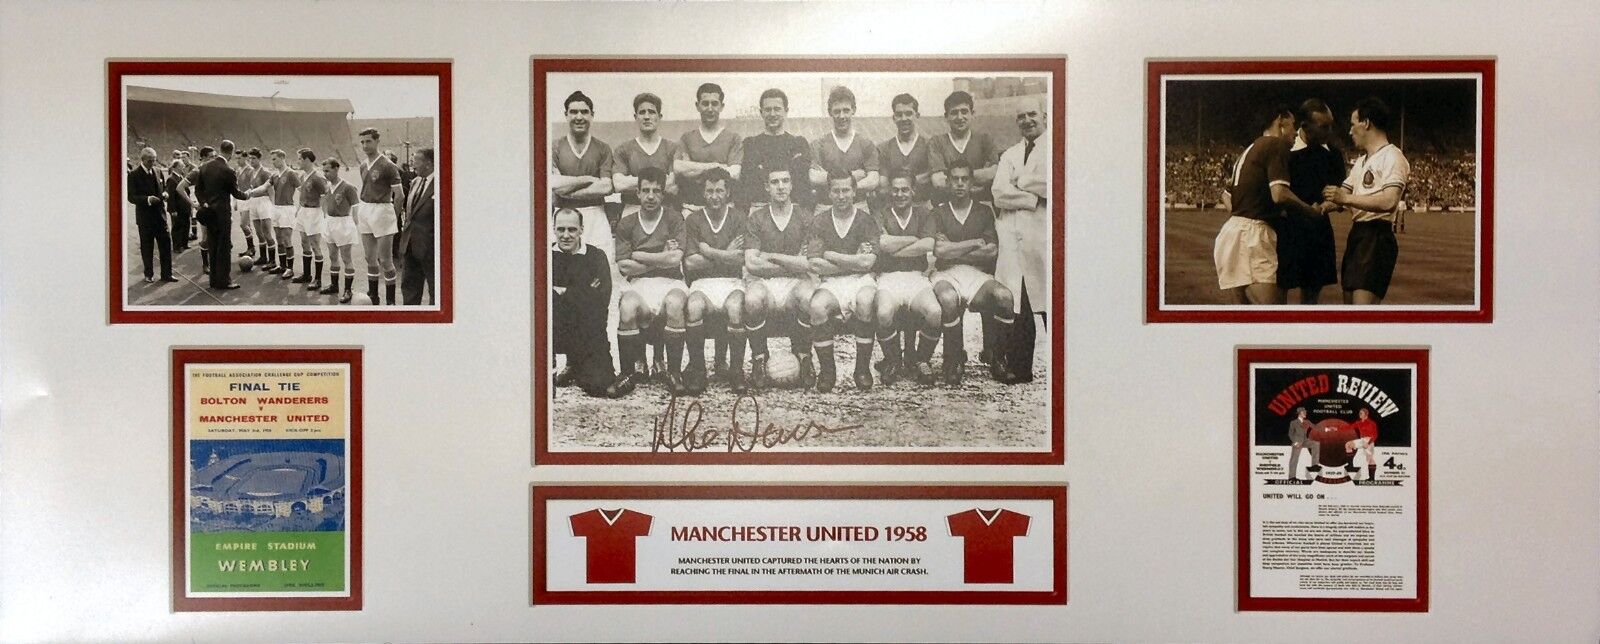 ALEX DAWSON SIGNED MANCHESTER UNITED 30x12 Photo Poster painting 1958 BUSBY BABES COA & PROOF